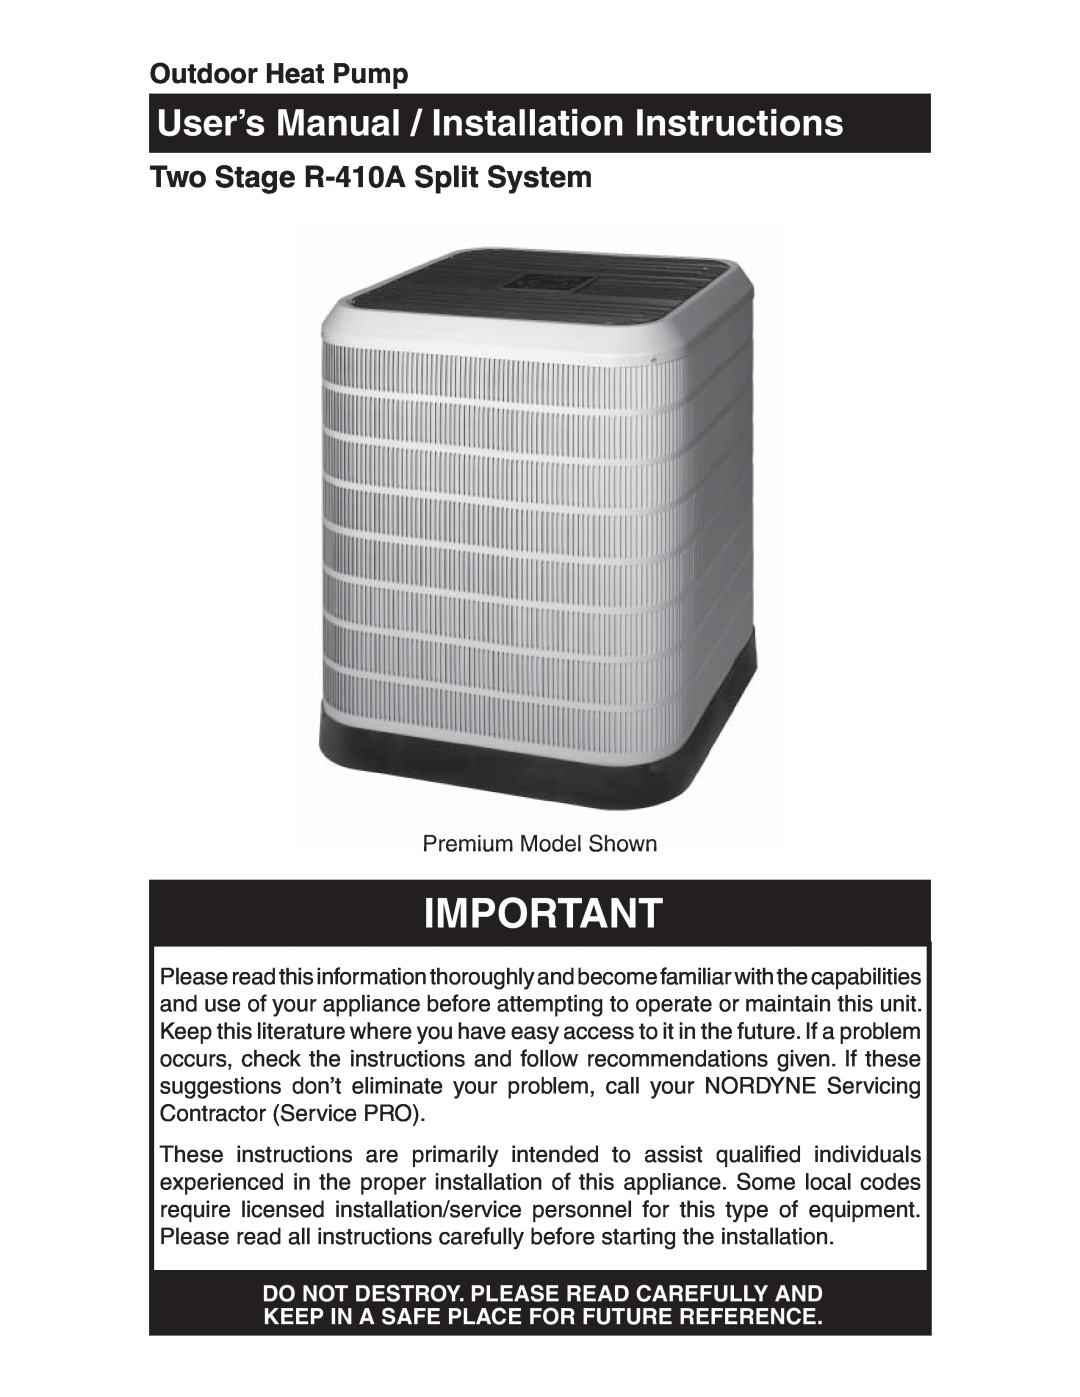 Nordyne user manual Stage R-410ASingle Package Heat Pump, Seer, Do Not Destroy. Please Read Carefully And 